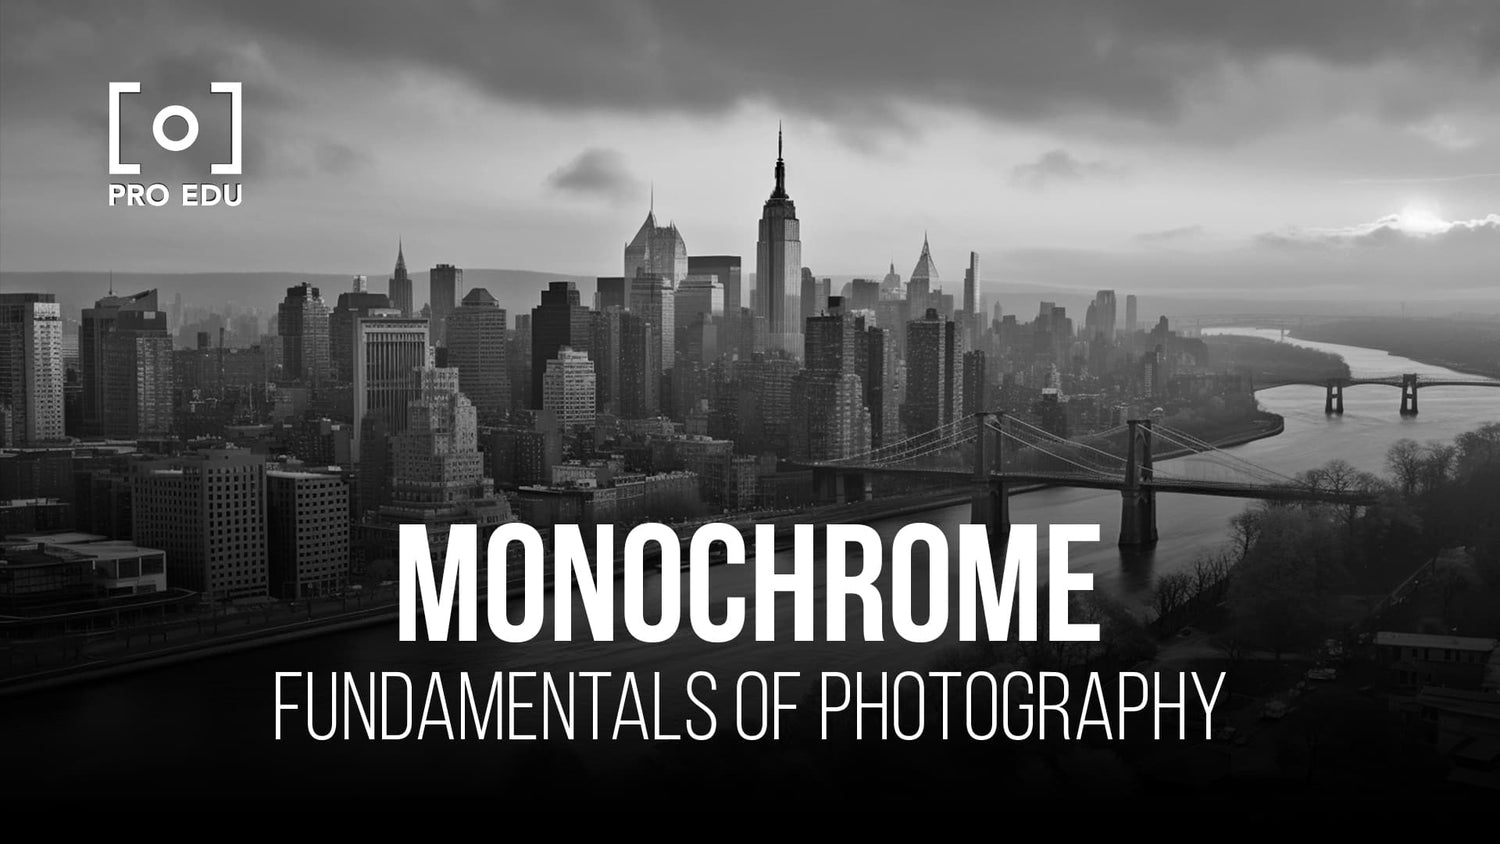 The power of black and white in monochrome photography, a creative approach